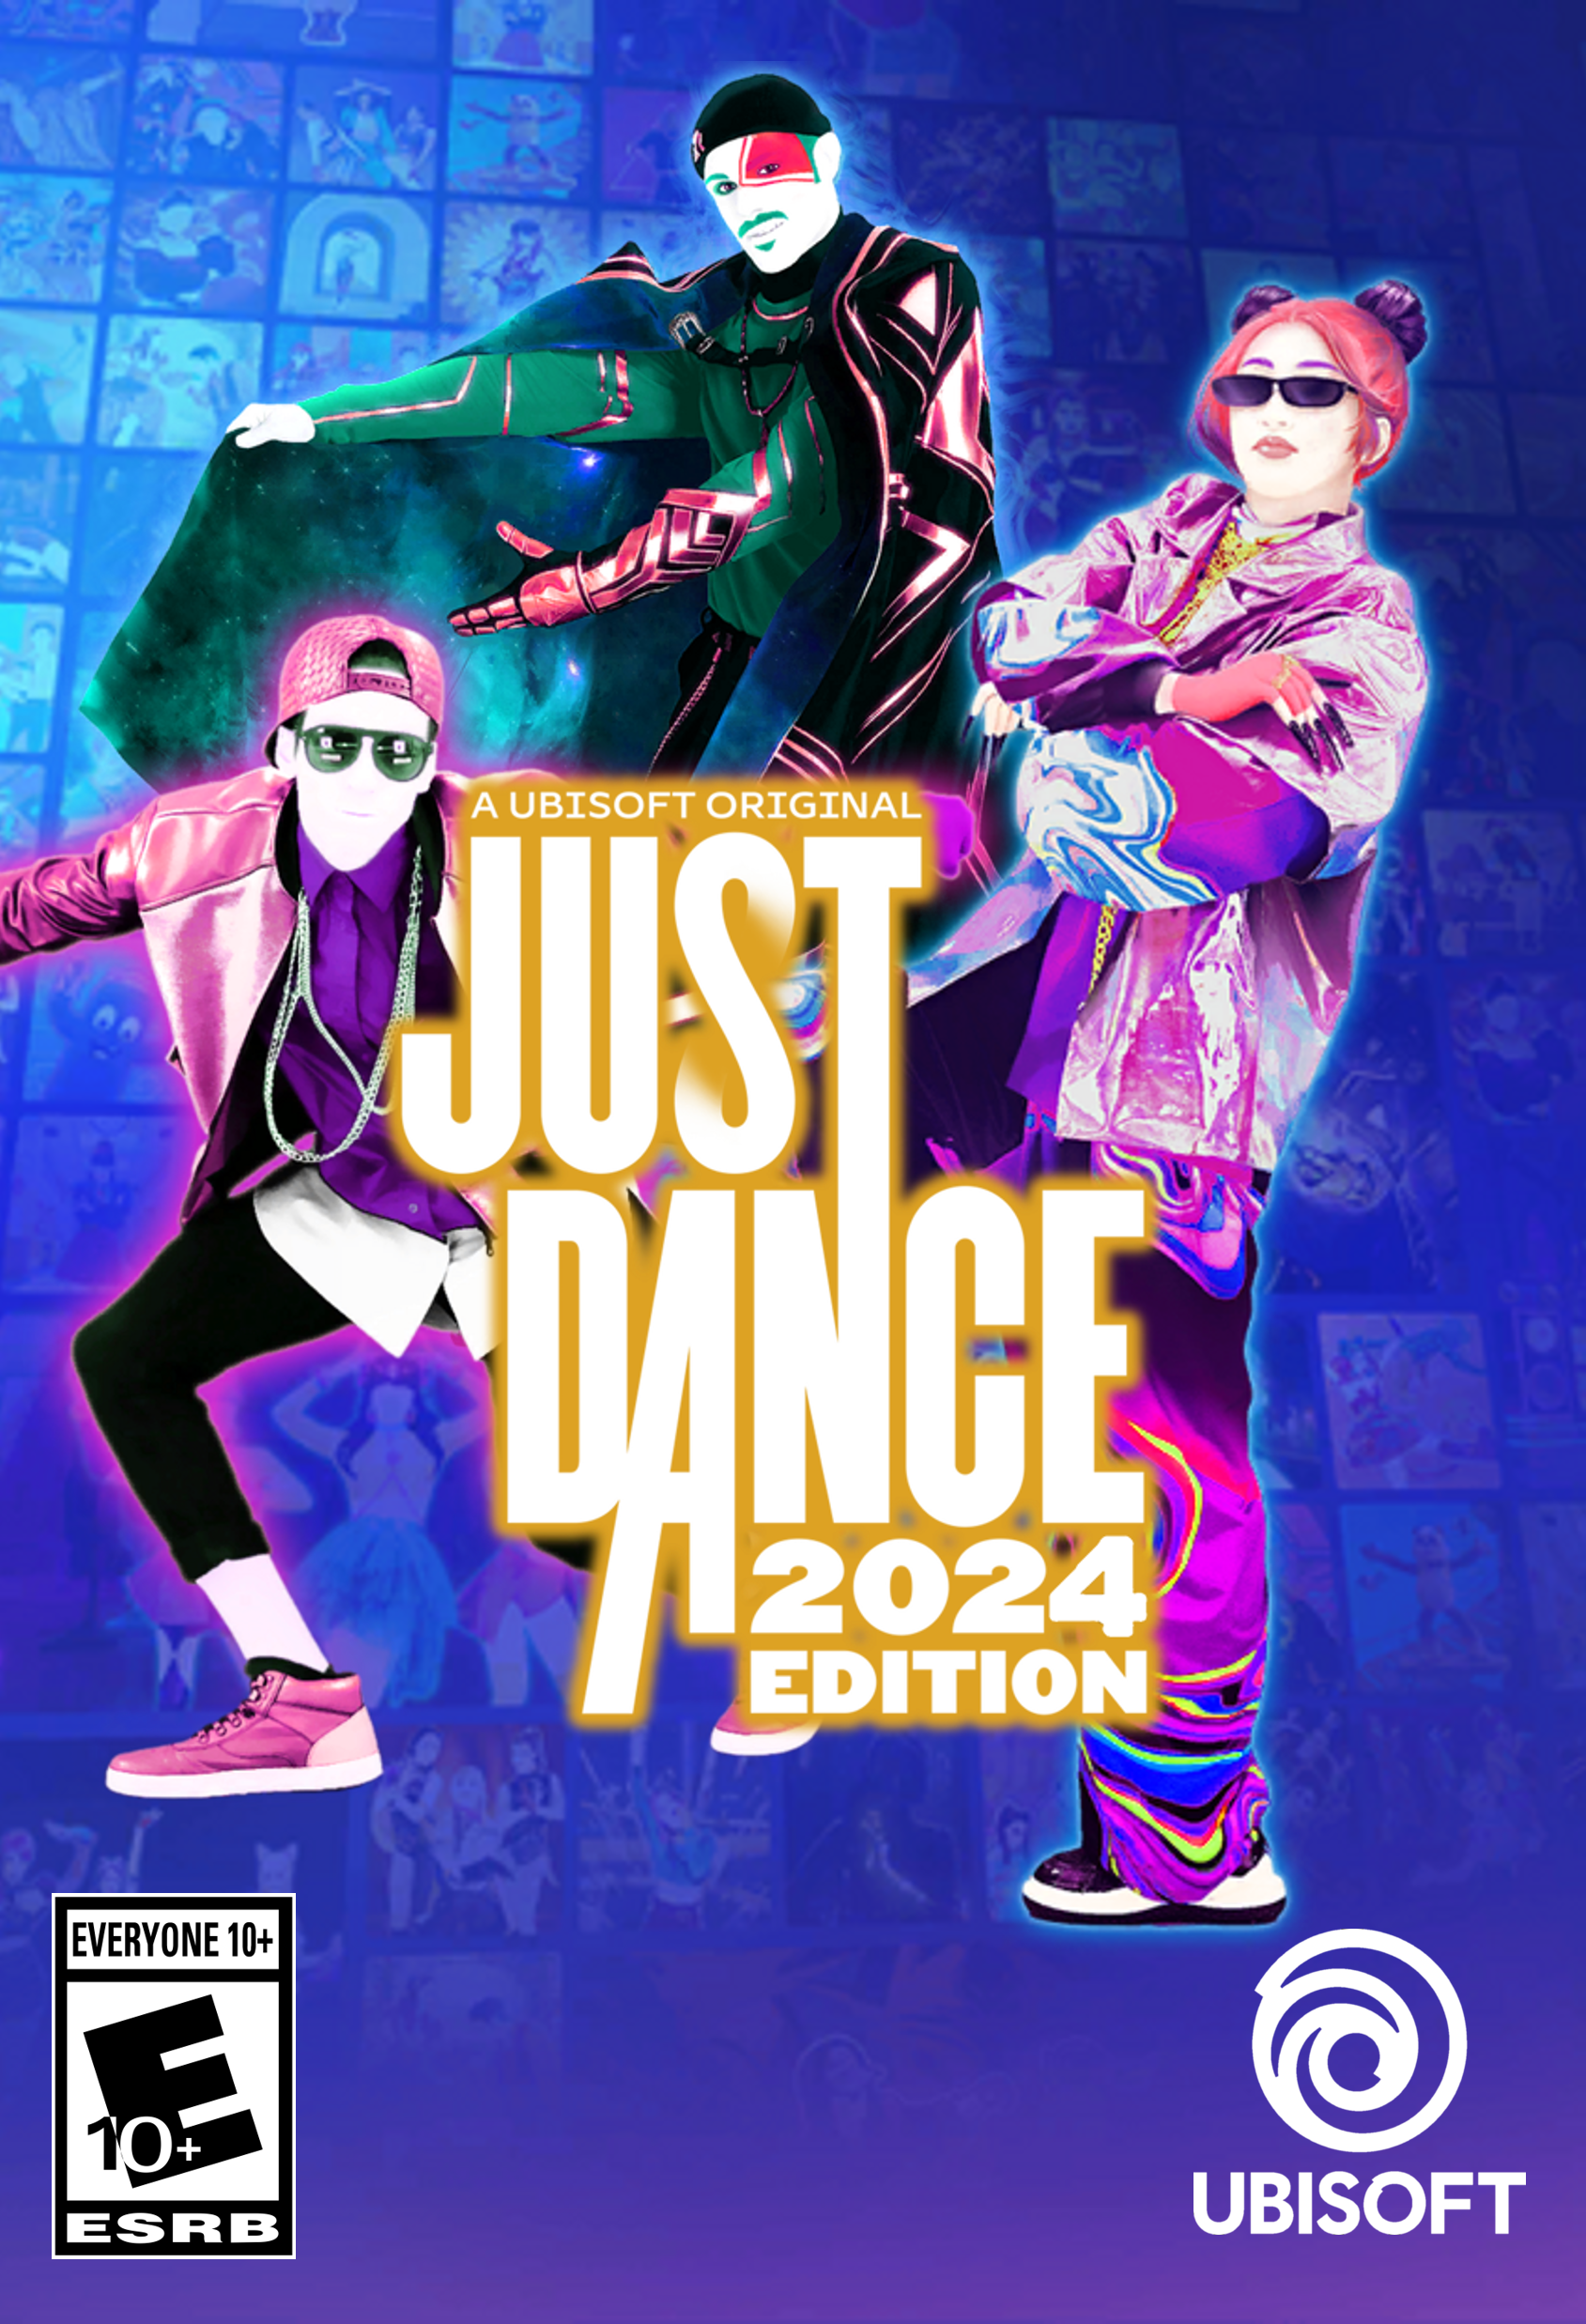 https://static.wikia.nocookie.net/justdance/images/0/07/Just_Dance_2024_fanmade_cover.png/revision/latest?cb=20230215180133